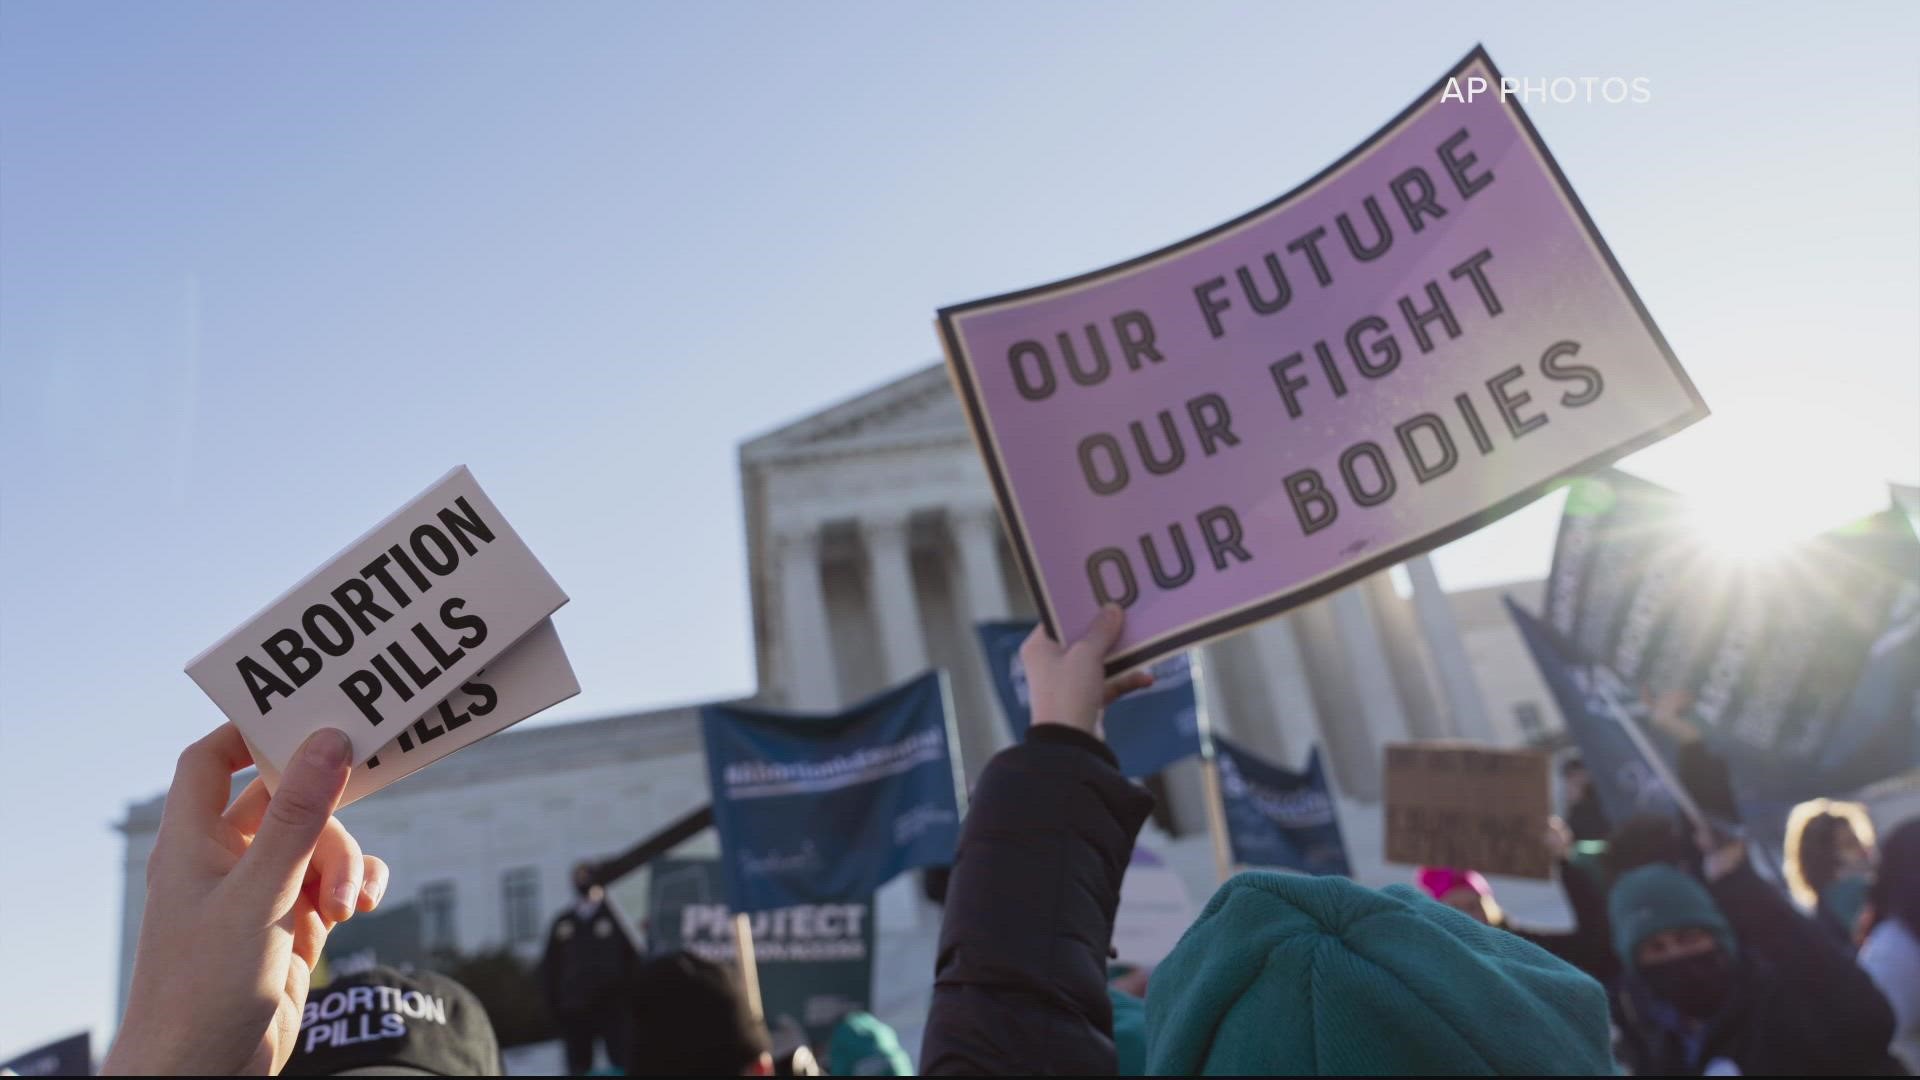 Pro-choice advocates argue more than two-thirds of Americans do not want the landmark Supreme Court decision overturned. Is that an accurate estimate?